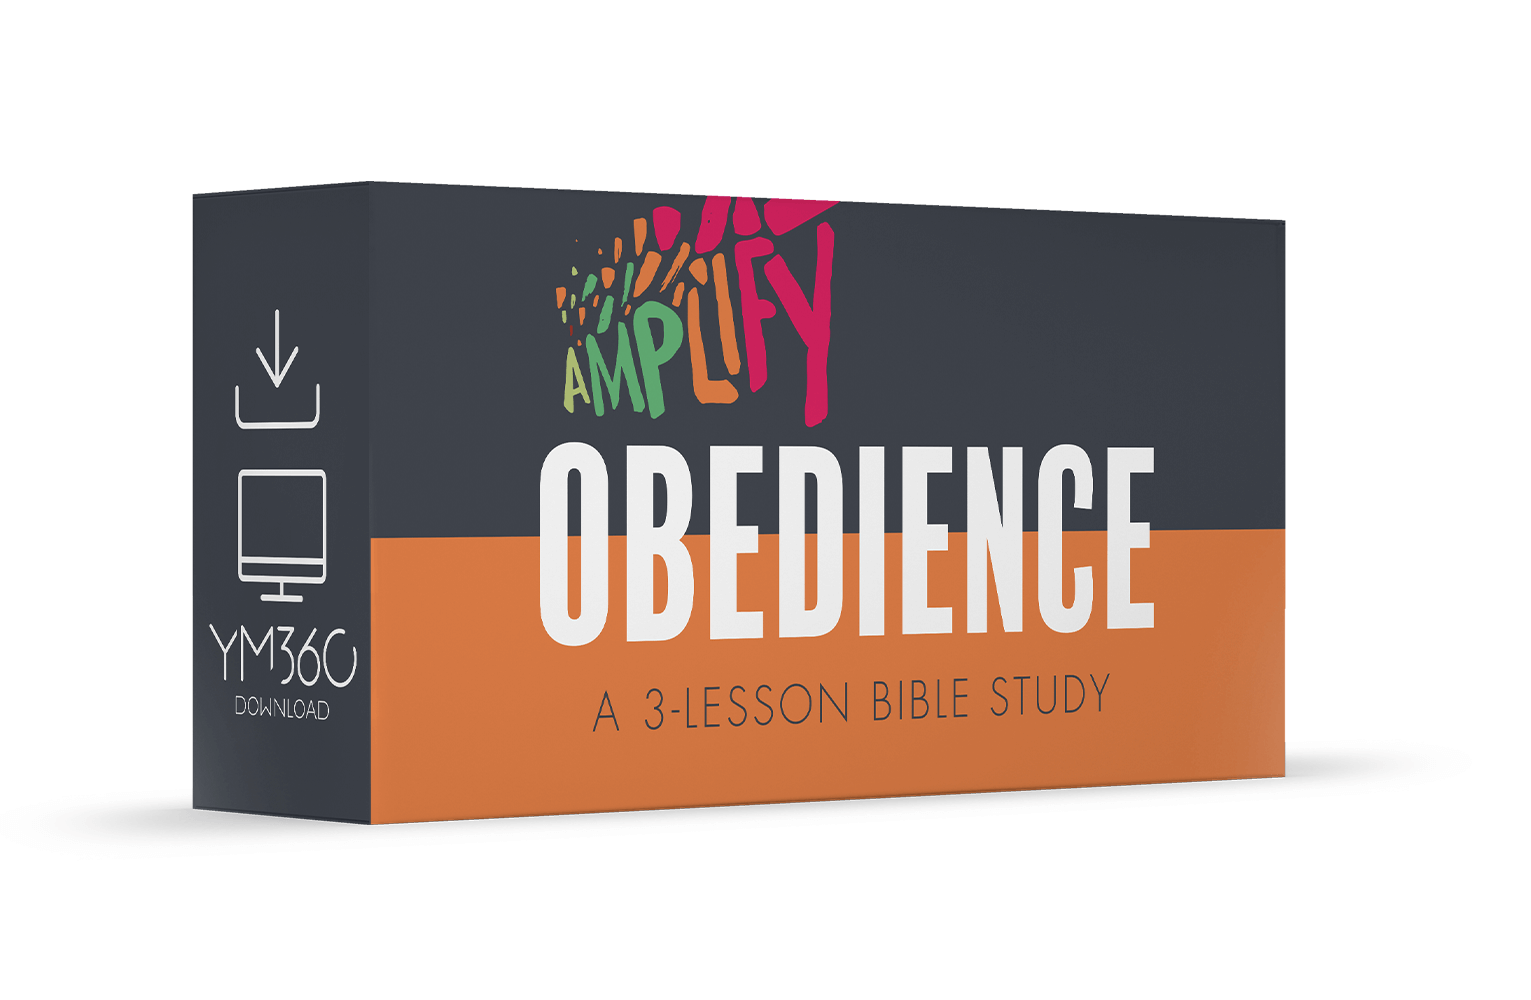 Obedience: A 3-Lesson Bible Study